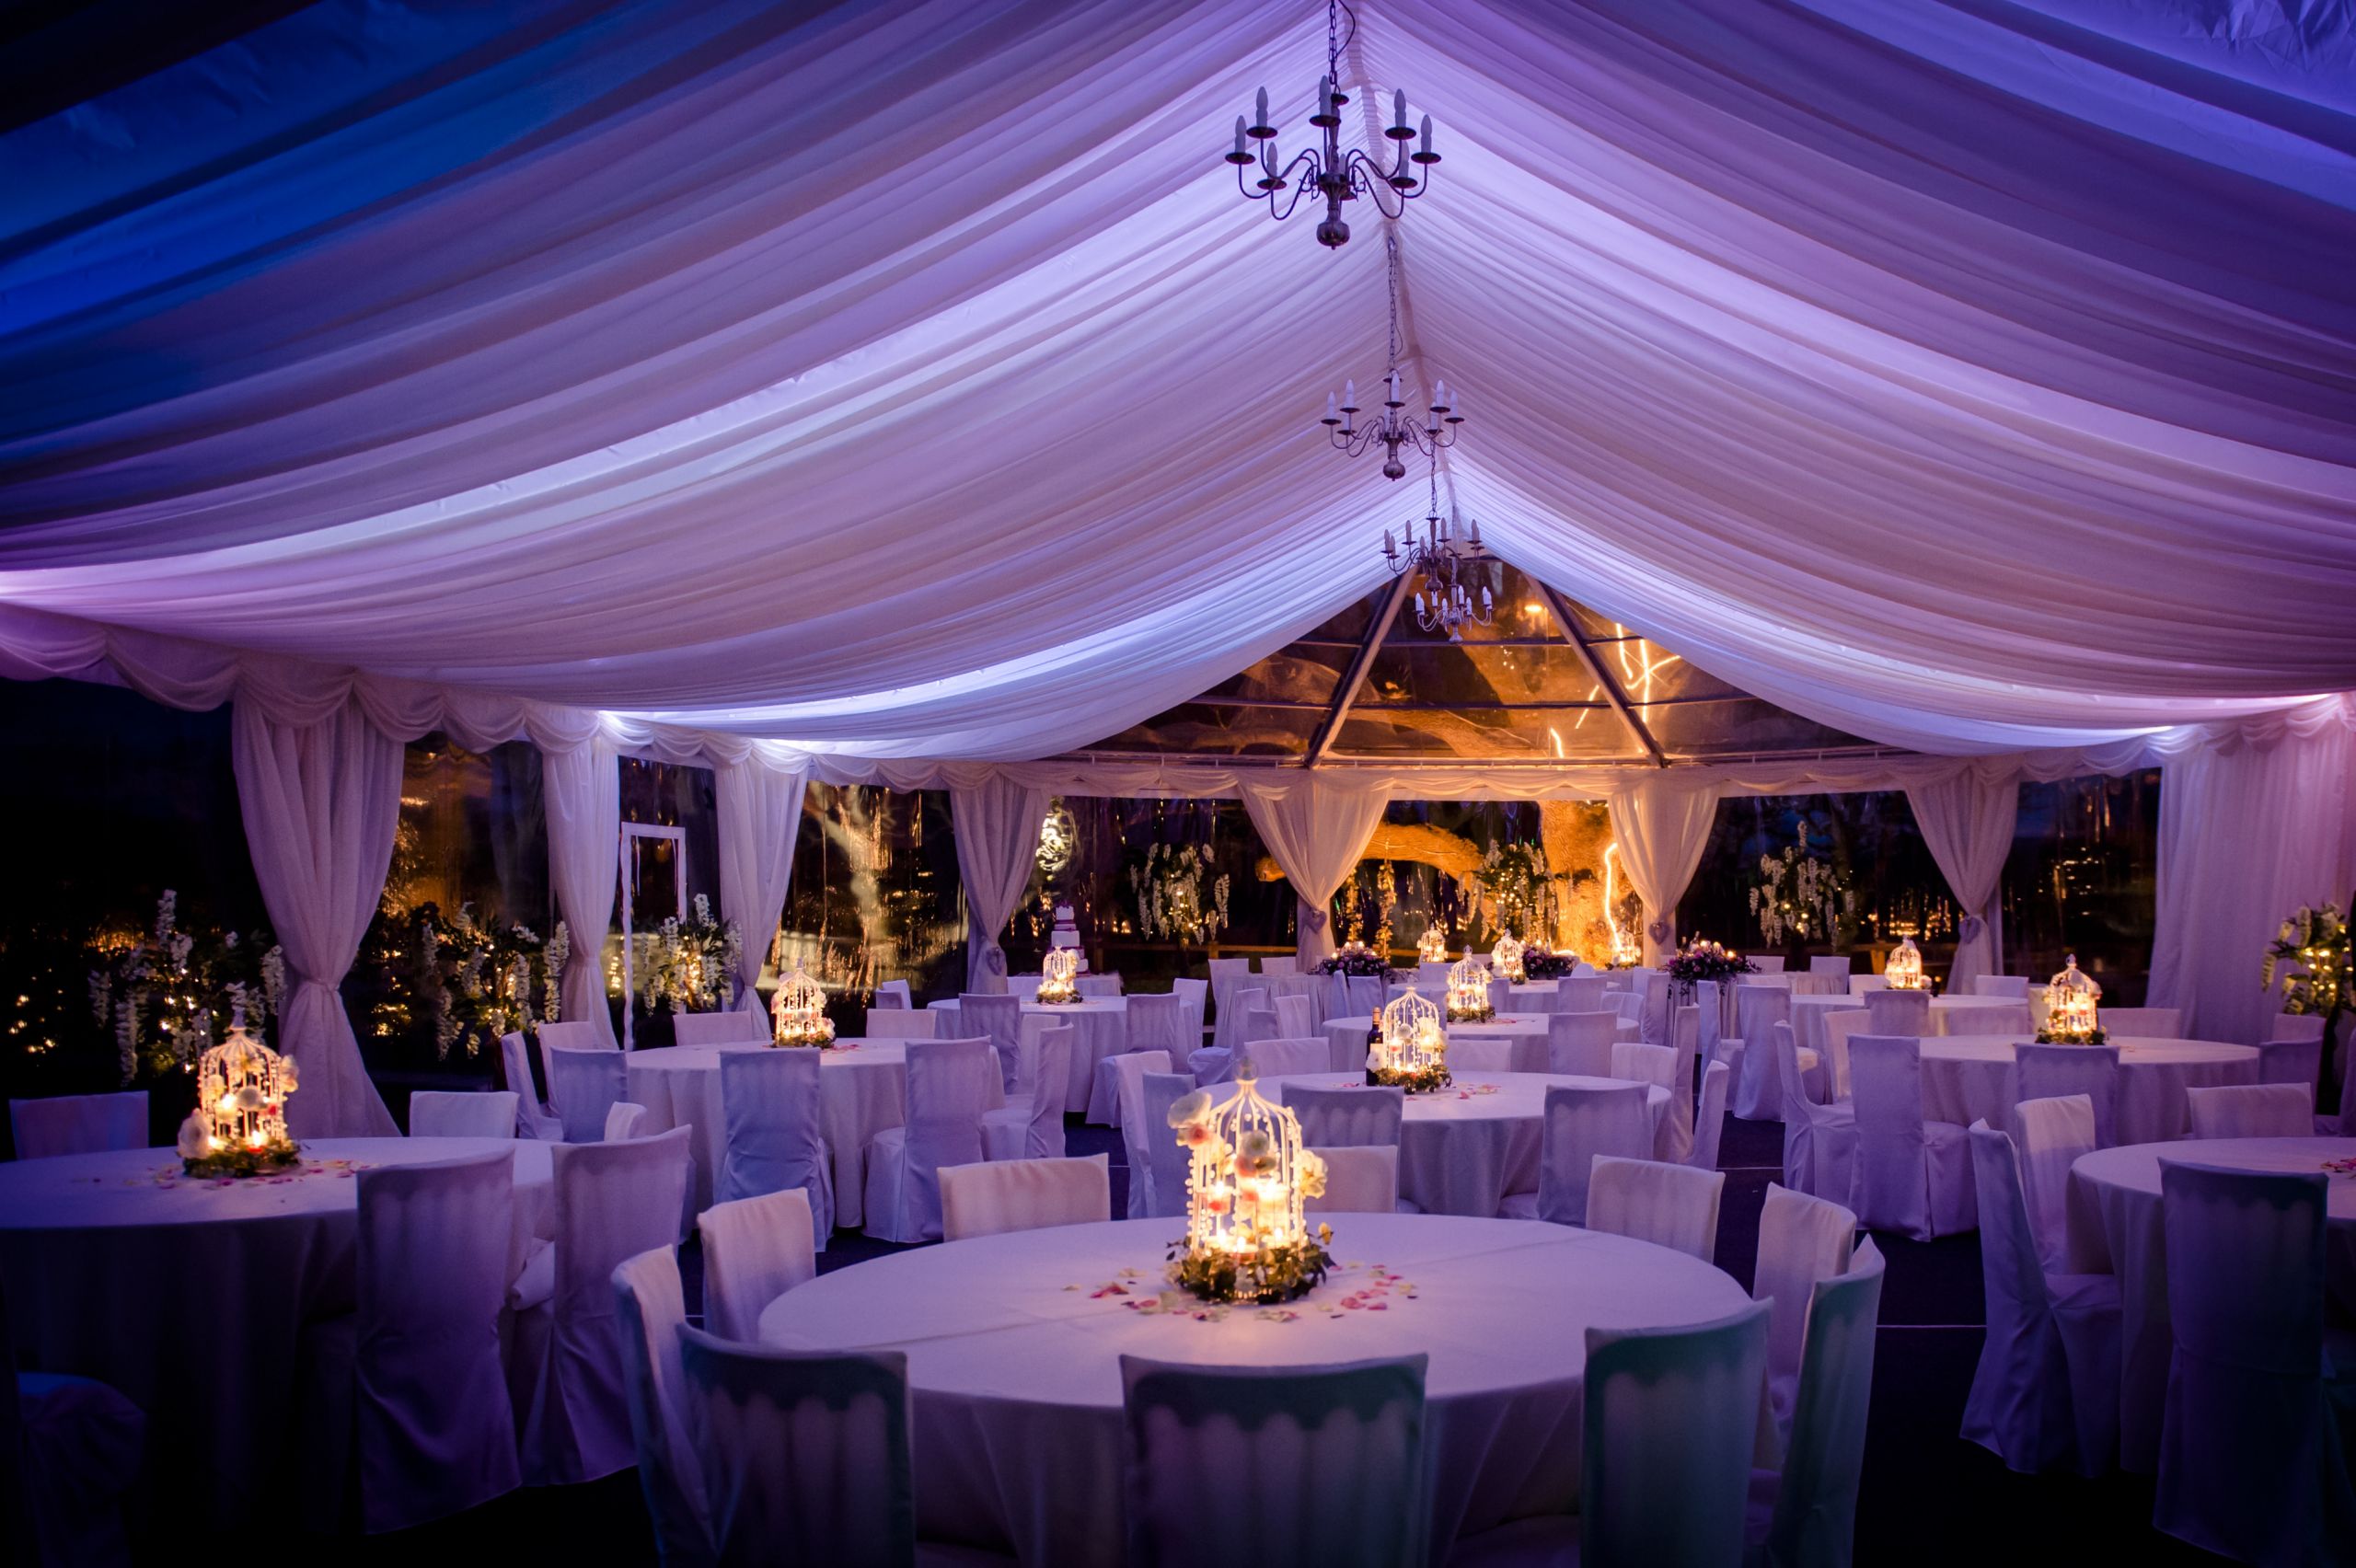 Engagement Party Venue Ideas
 How to Choose the Right Wedding Venue Planning a Wedding